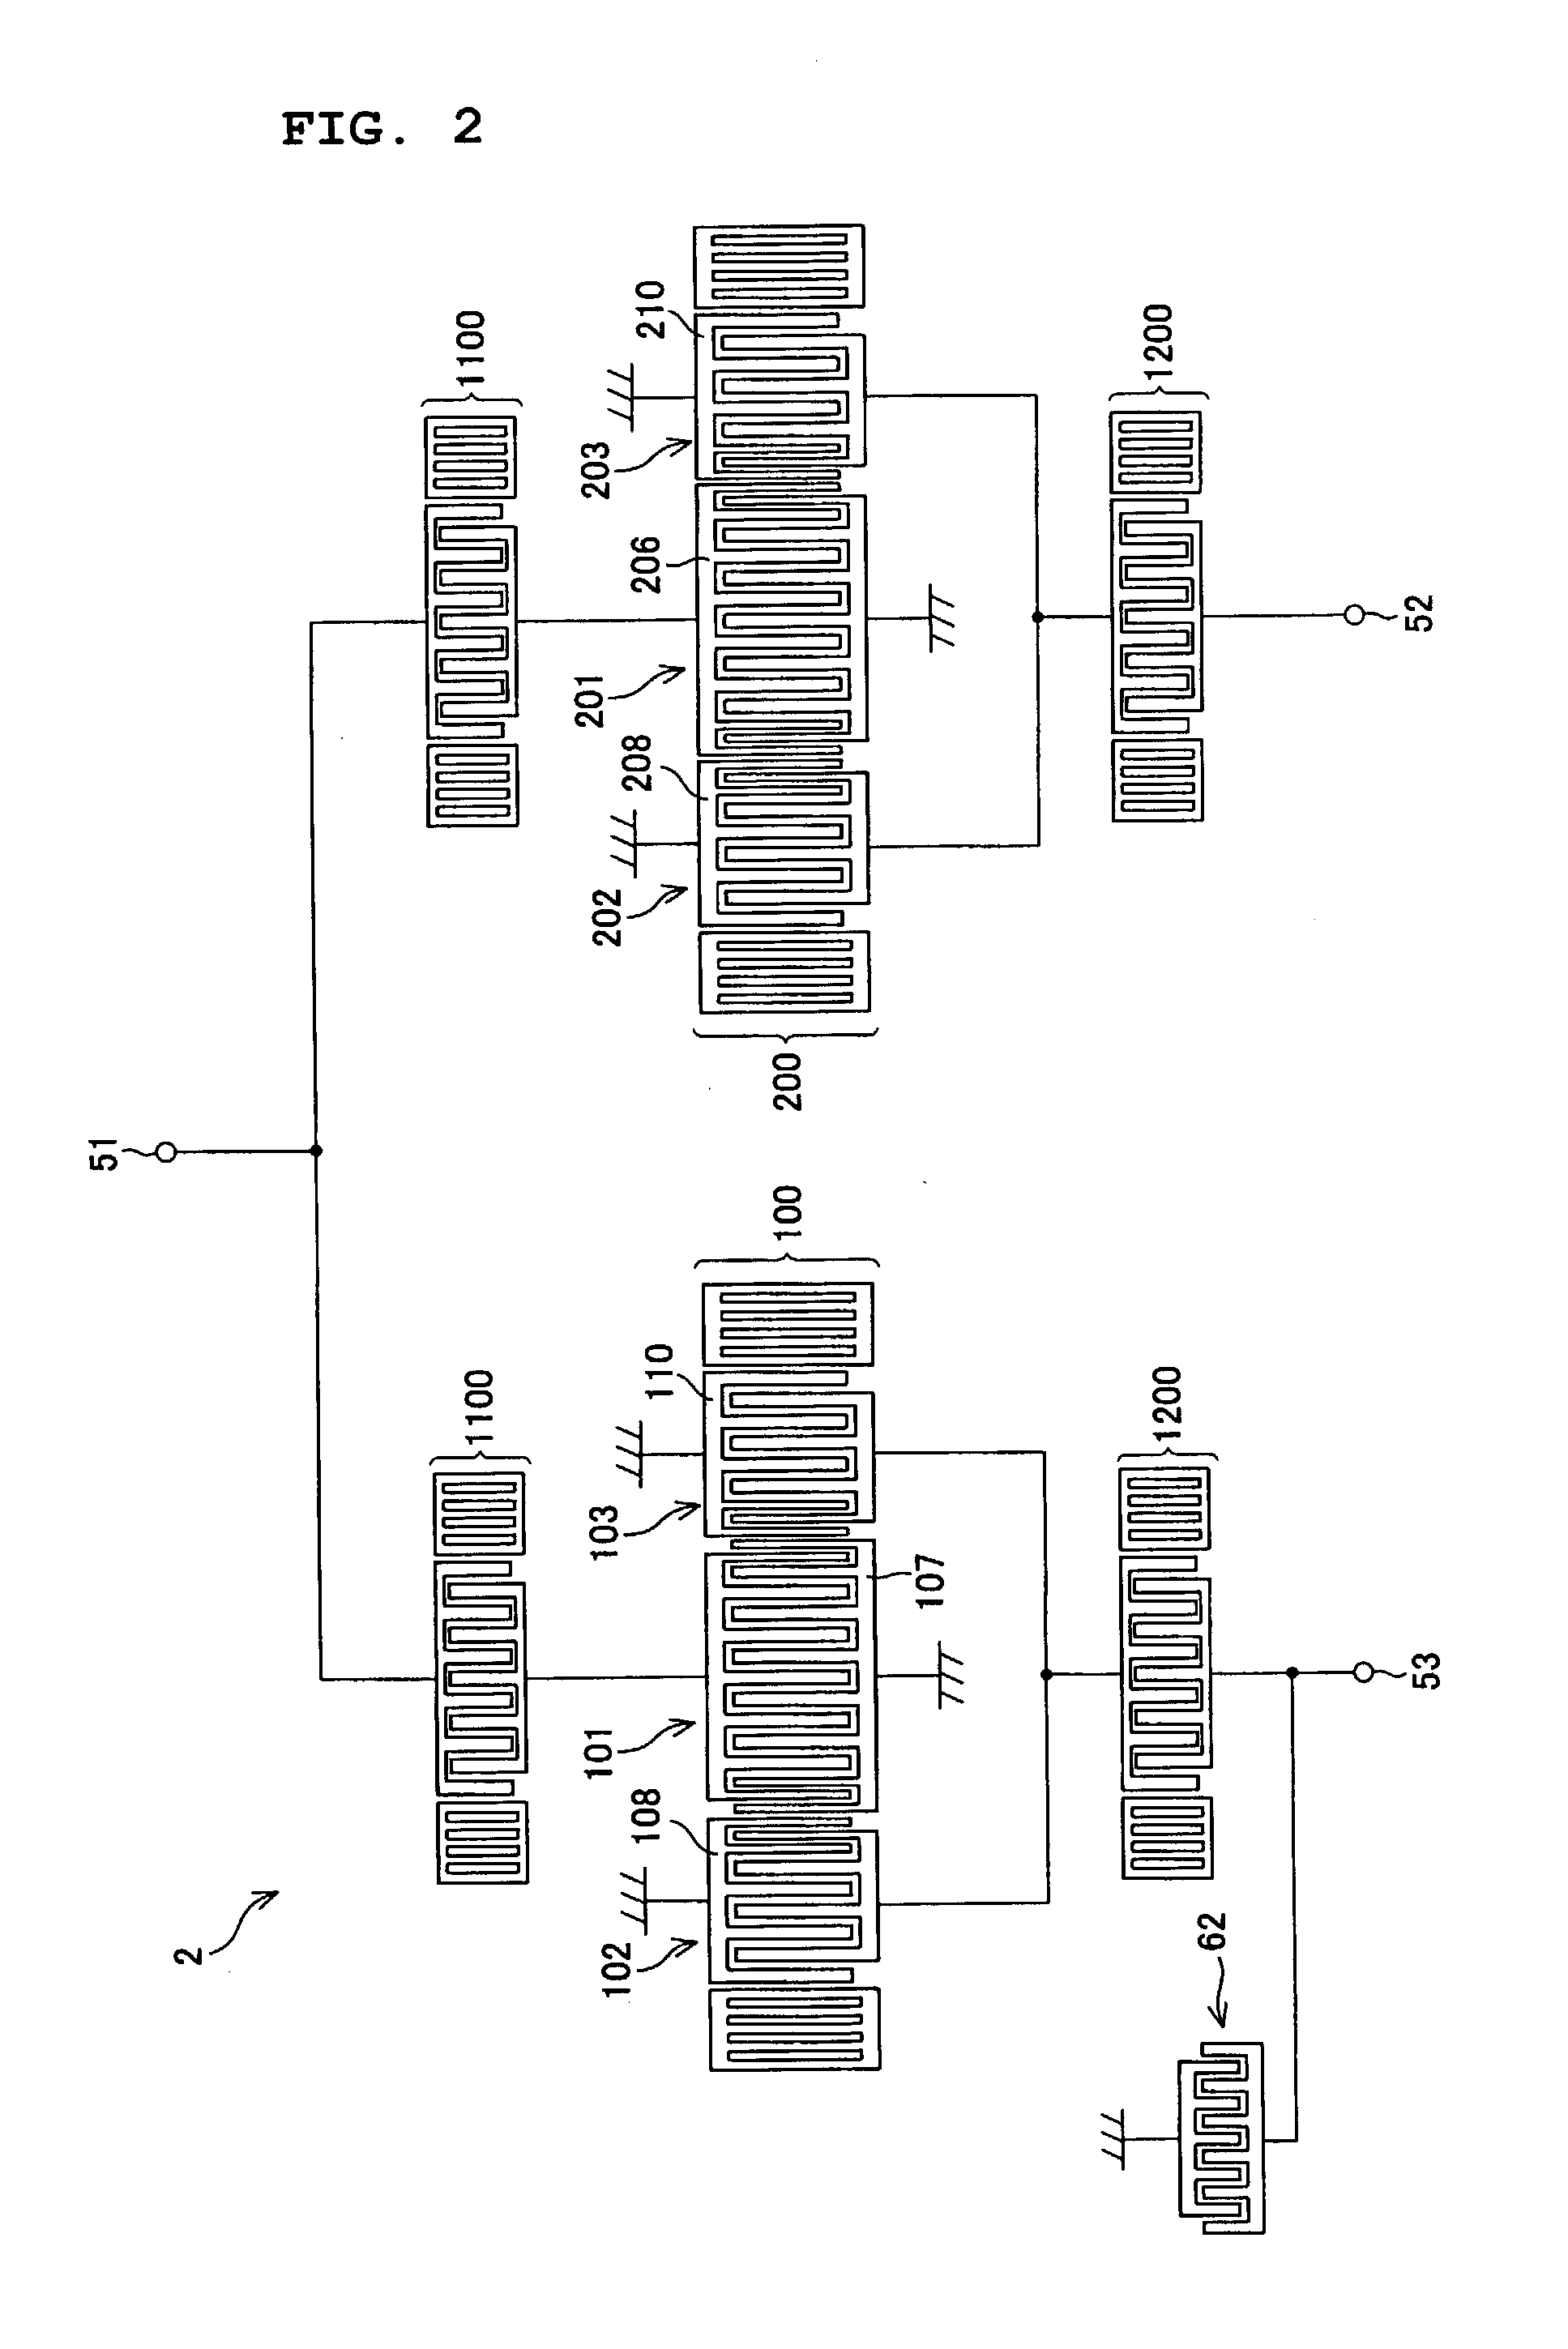 Surface acoustic wave device and communication apparatus incorporating the same